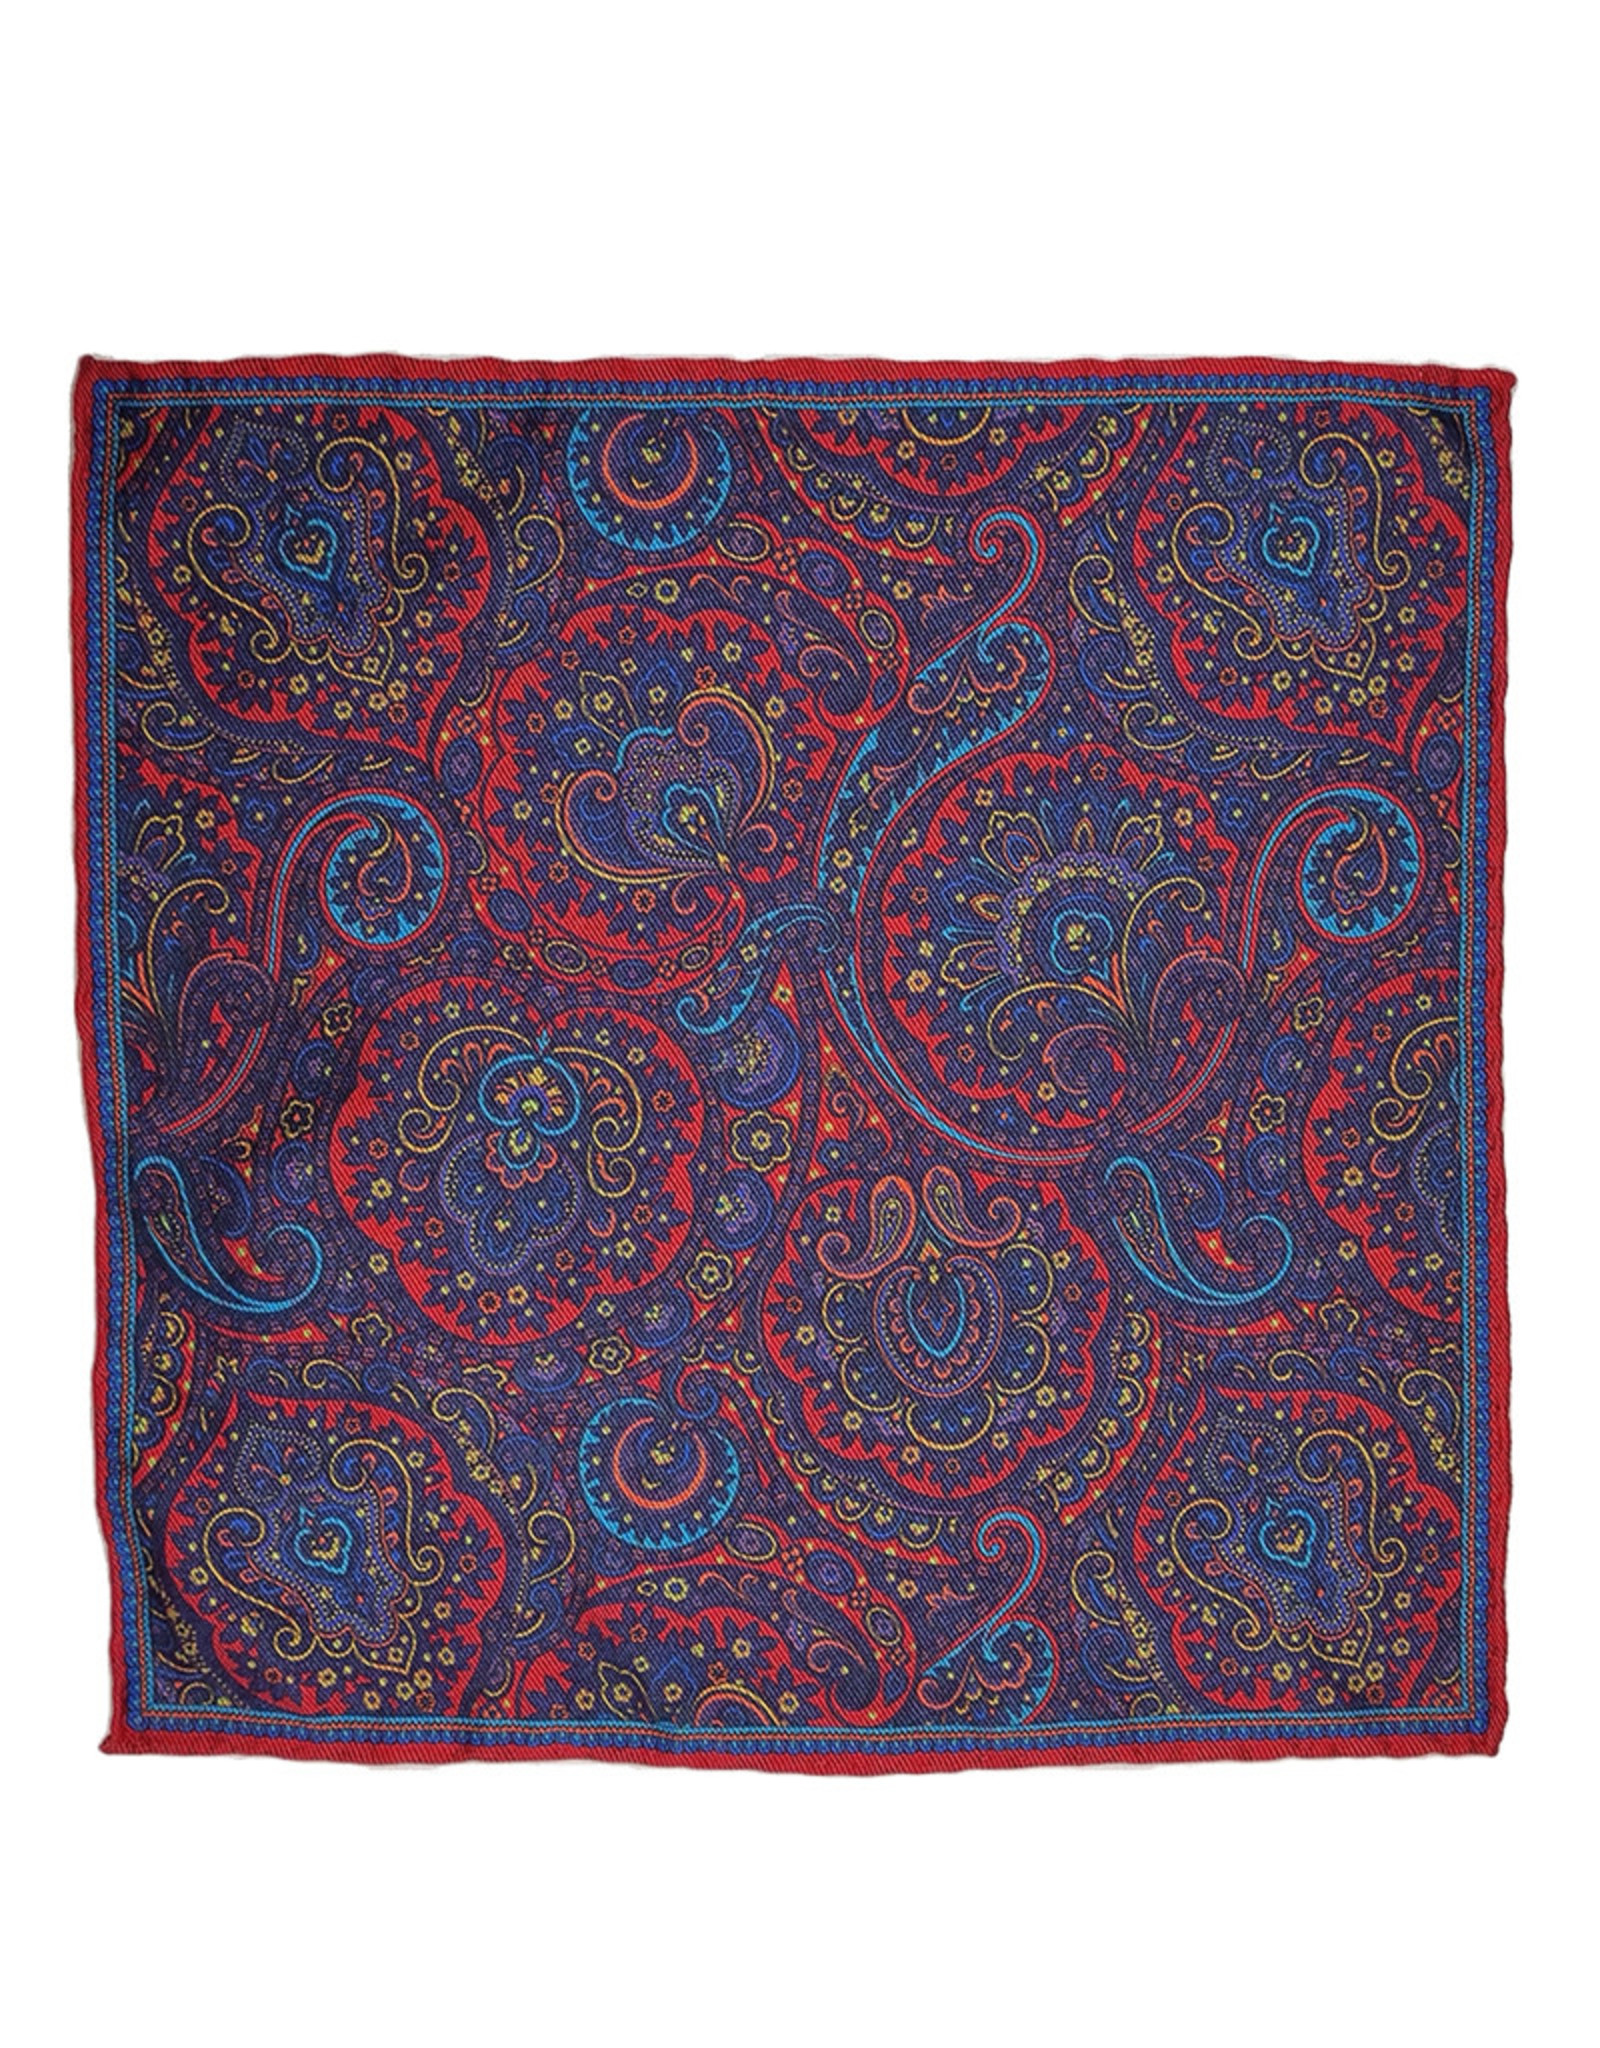 Calabrese Calabrese pocket square flantasy red